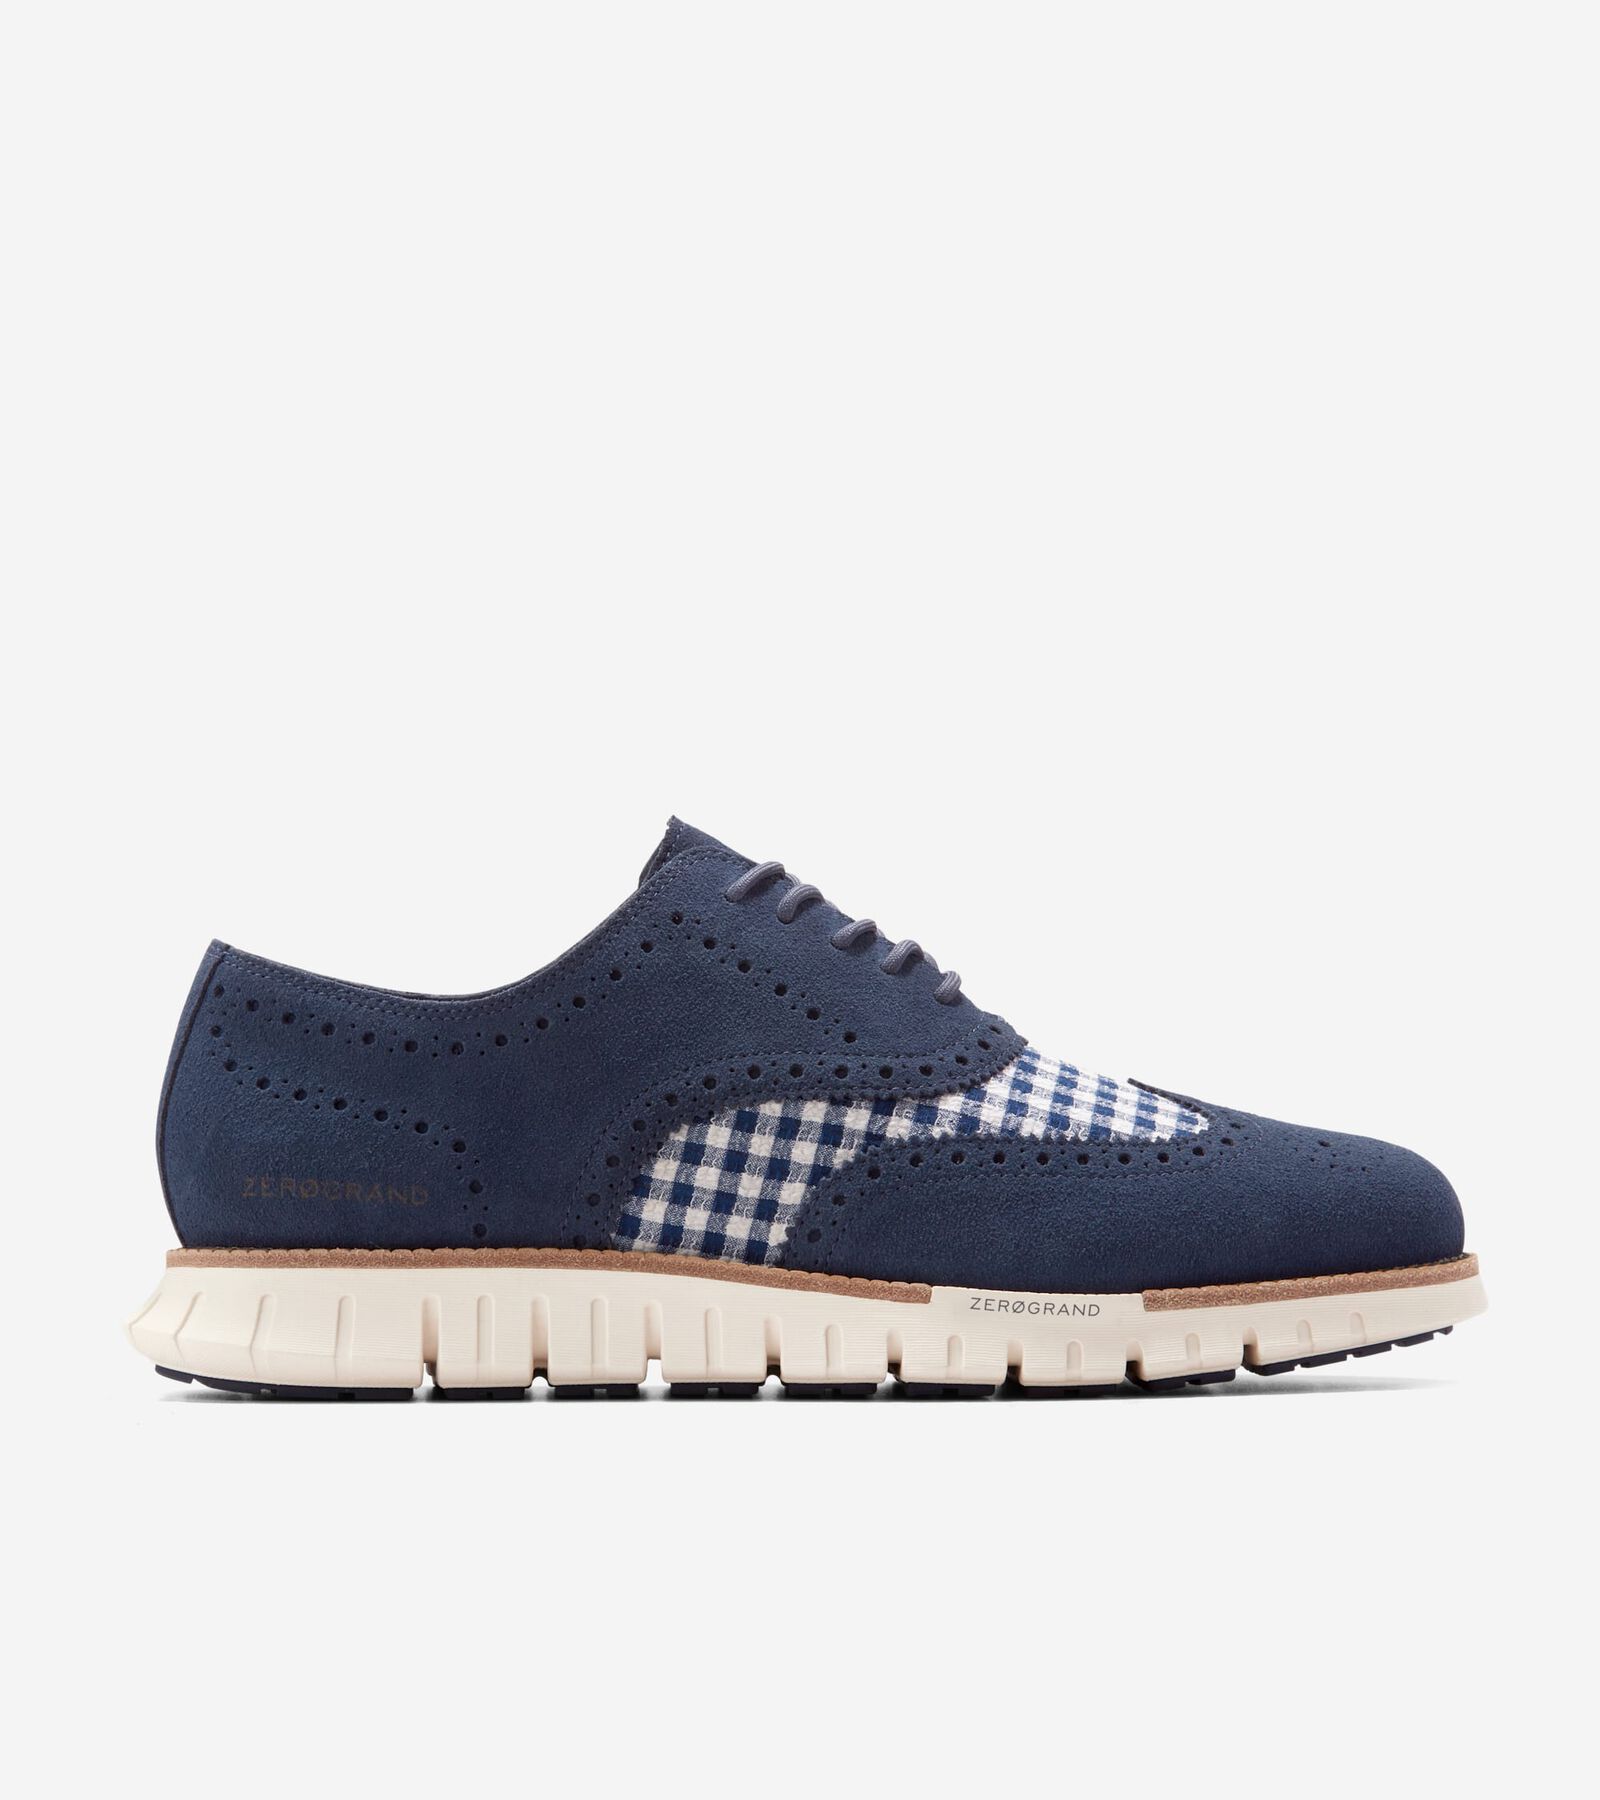 Cole Haan Zerøgrand Remastered Wingtip Ox Lined In Navy Blazer Blue Gingham-ivory